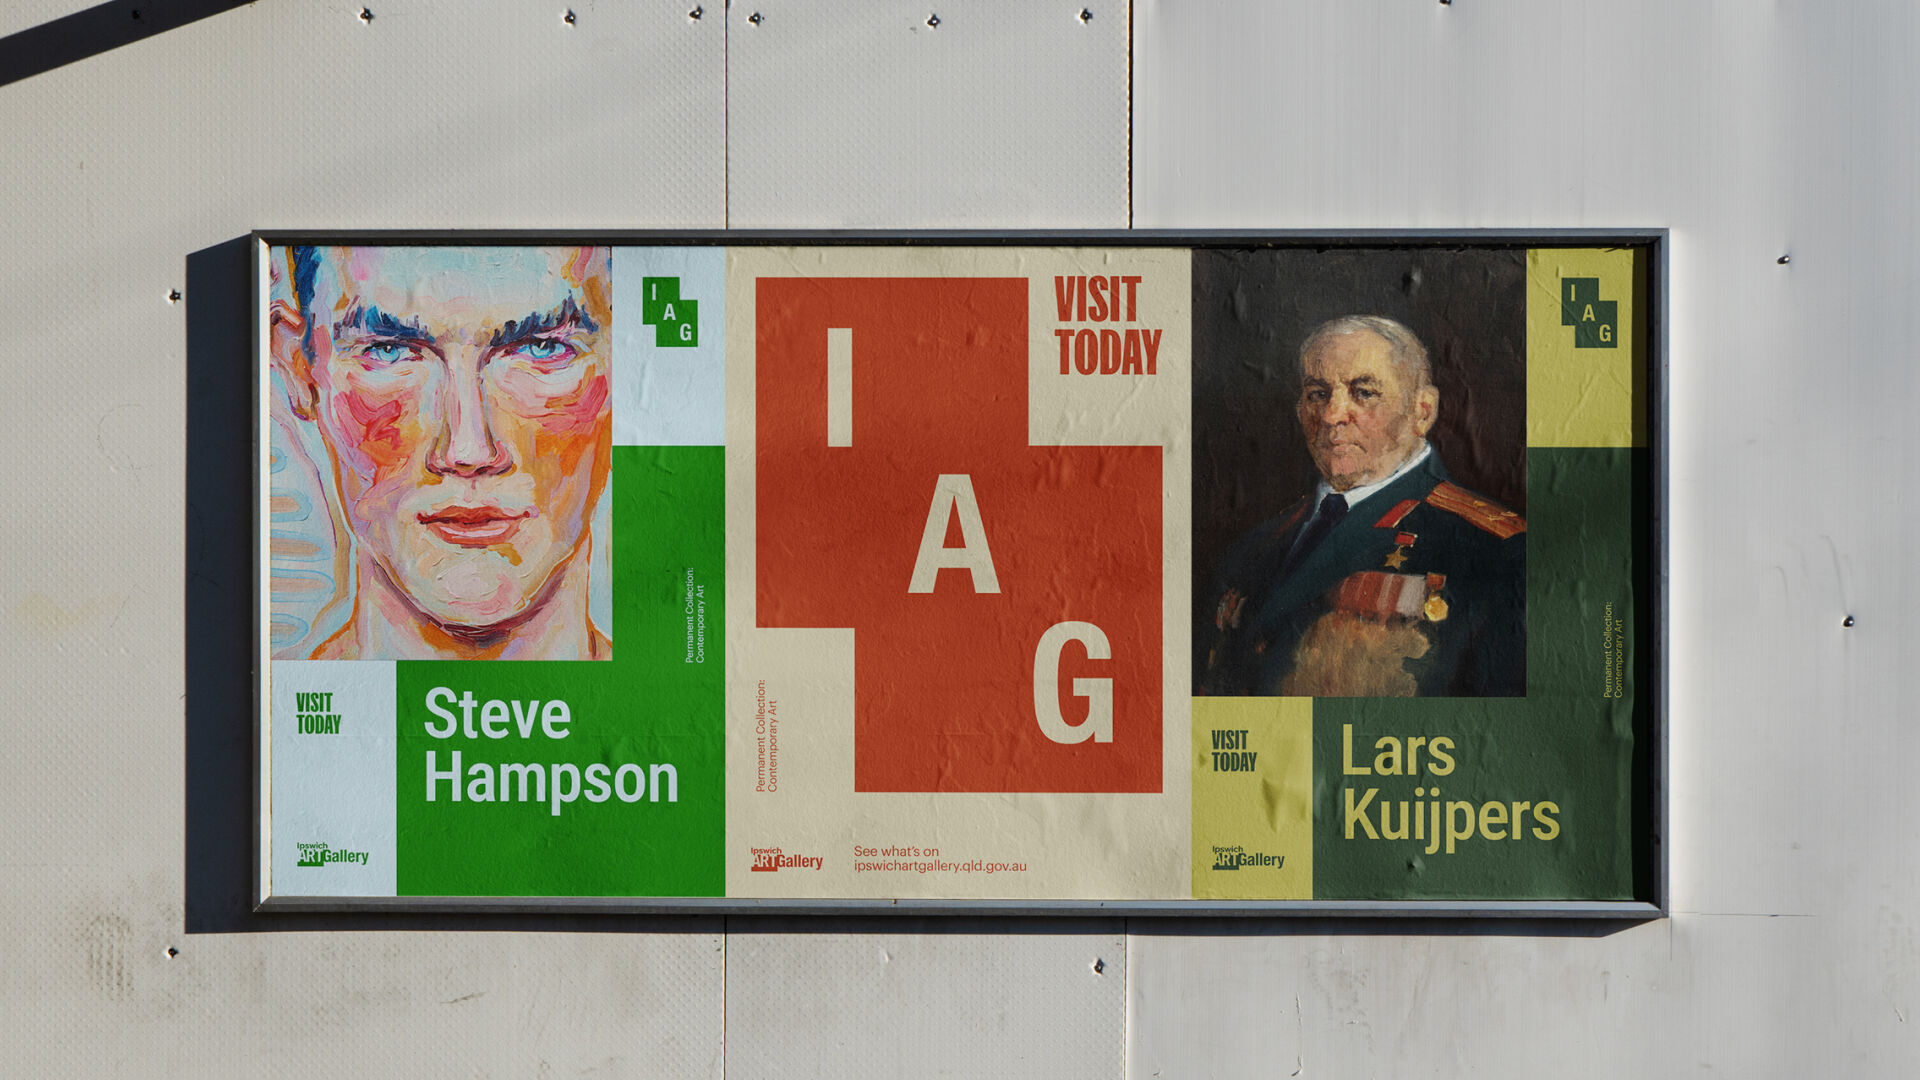 Structured, contemporary posters designed for the Ipswich Art Gallery brand